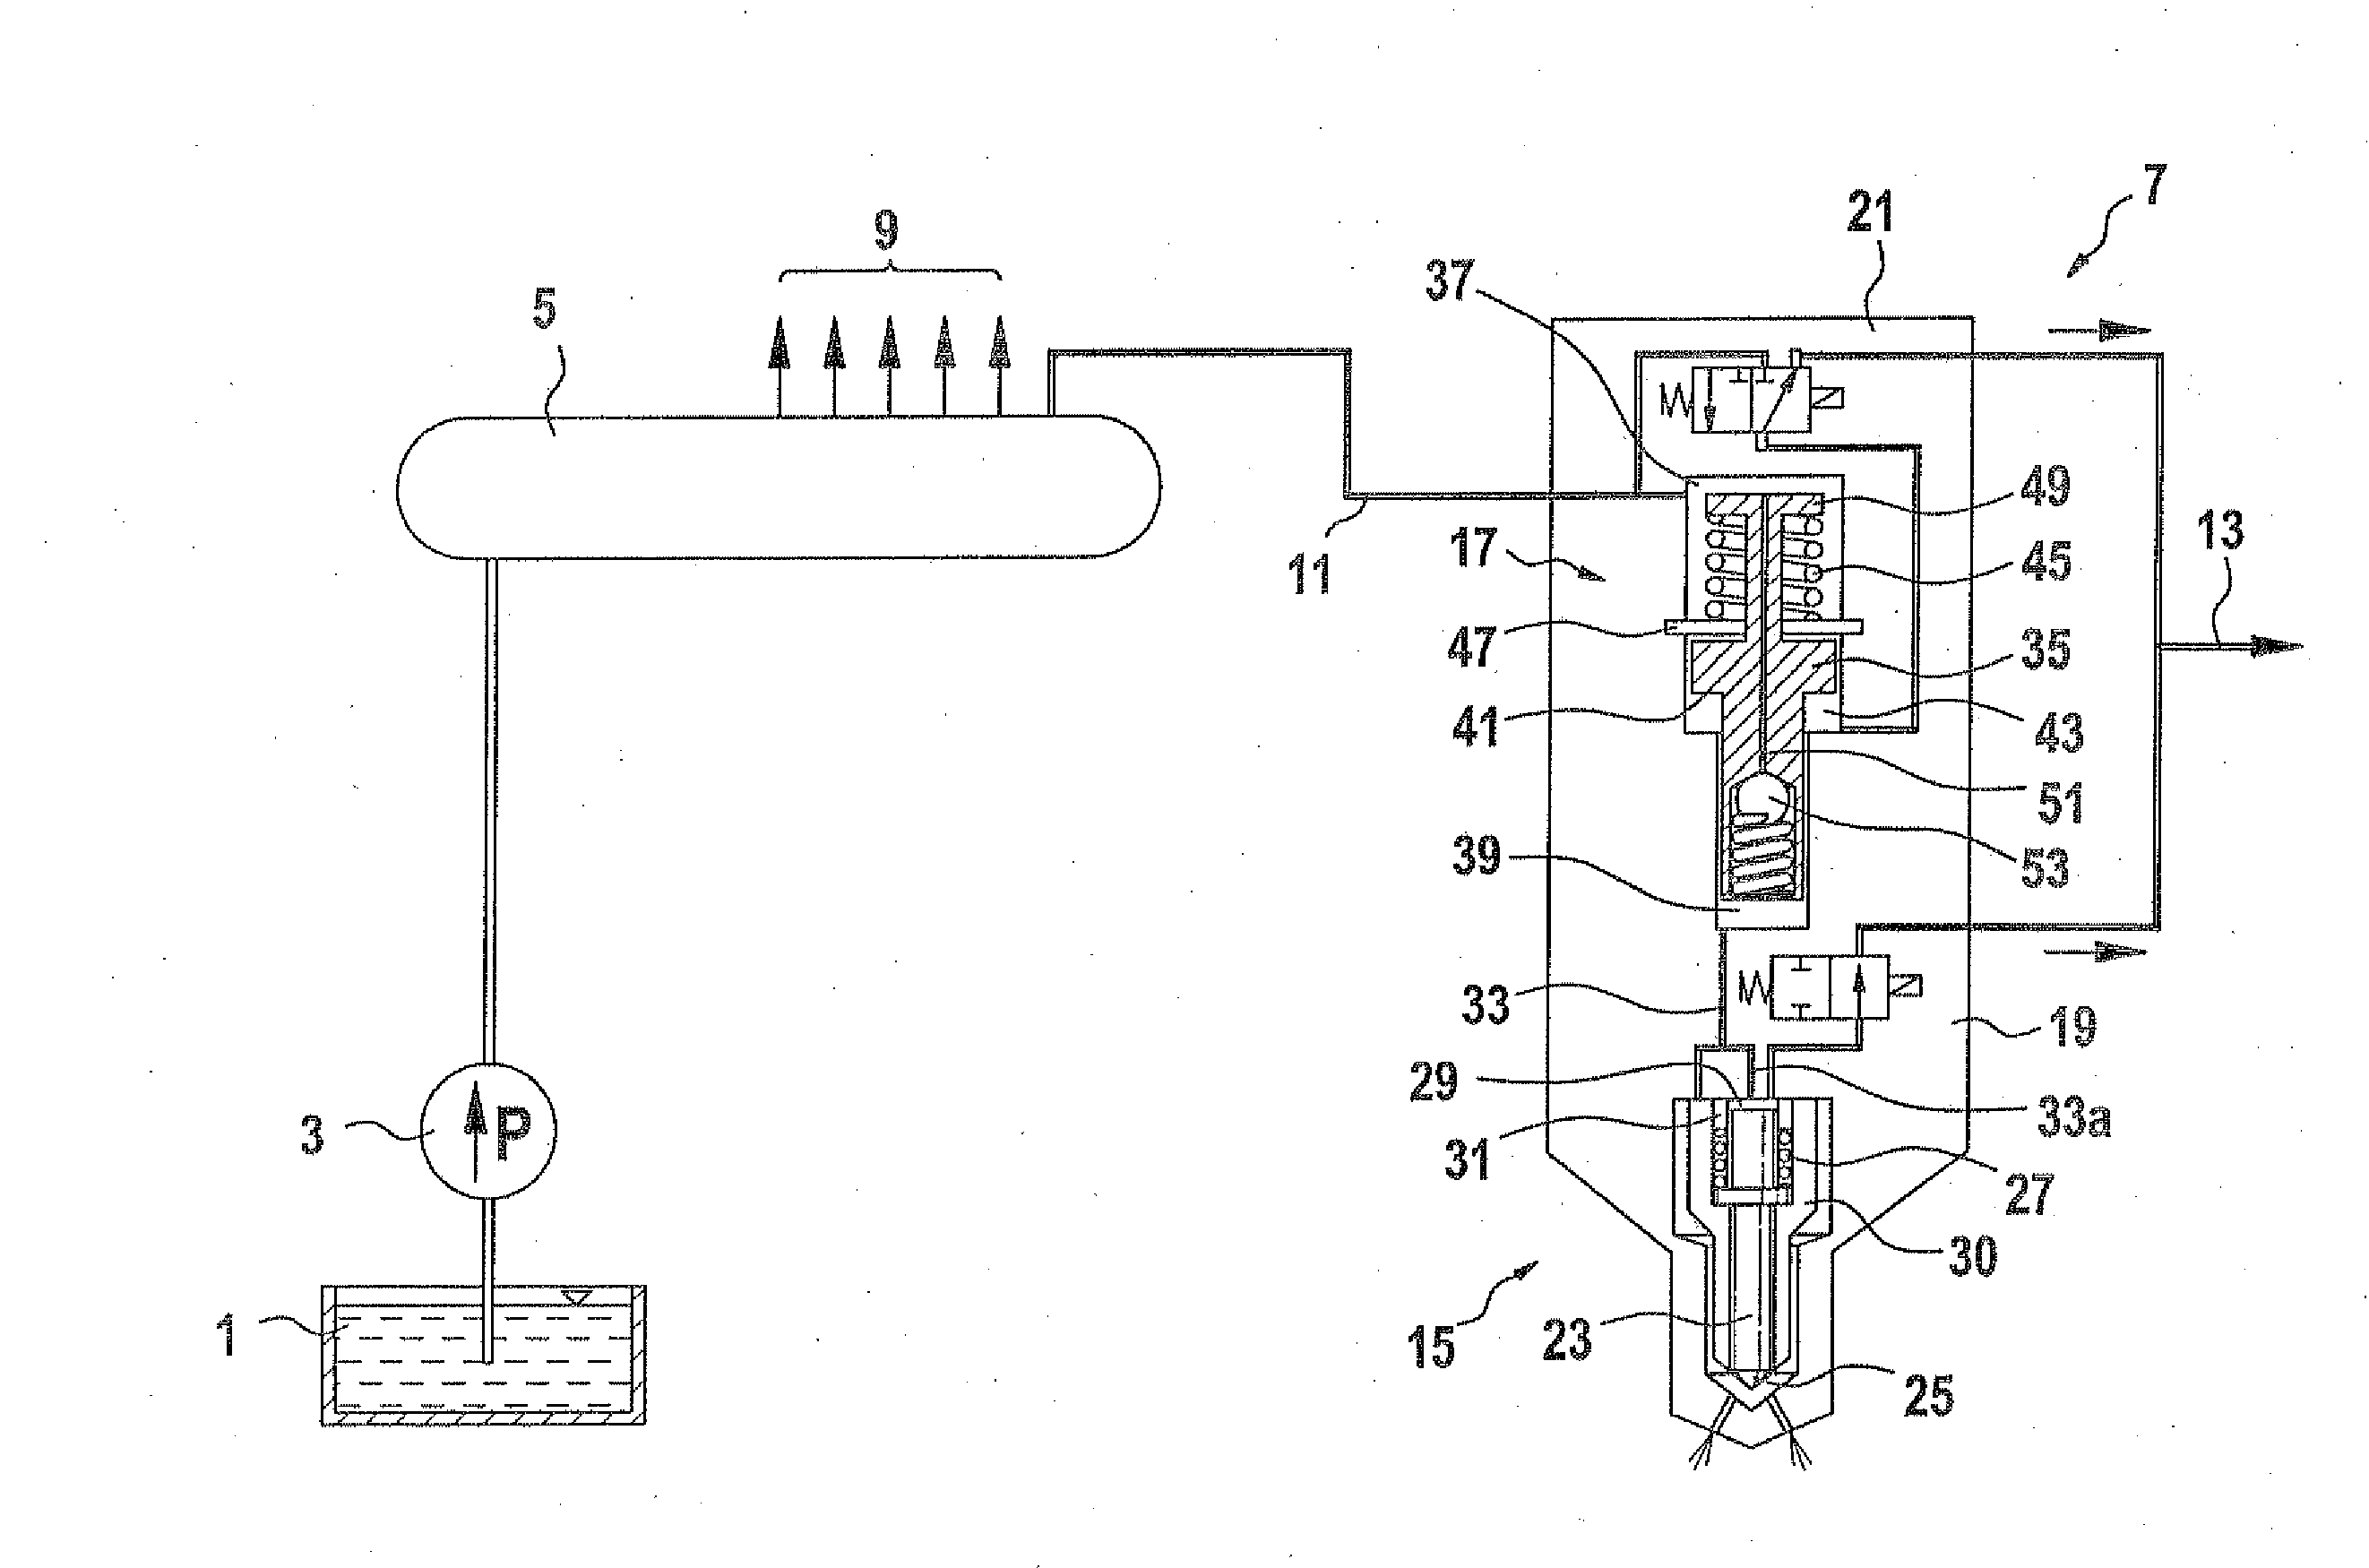 Injector With A Pressure Intensifier That Can Be Switched On